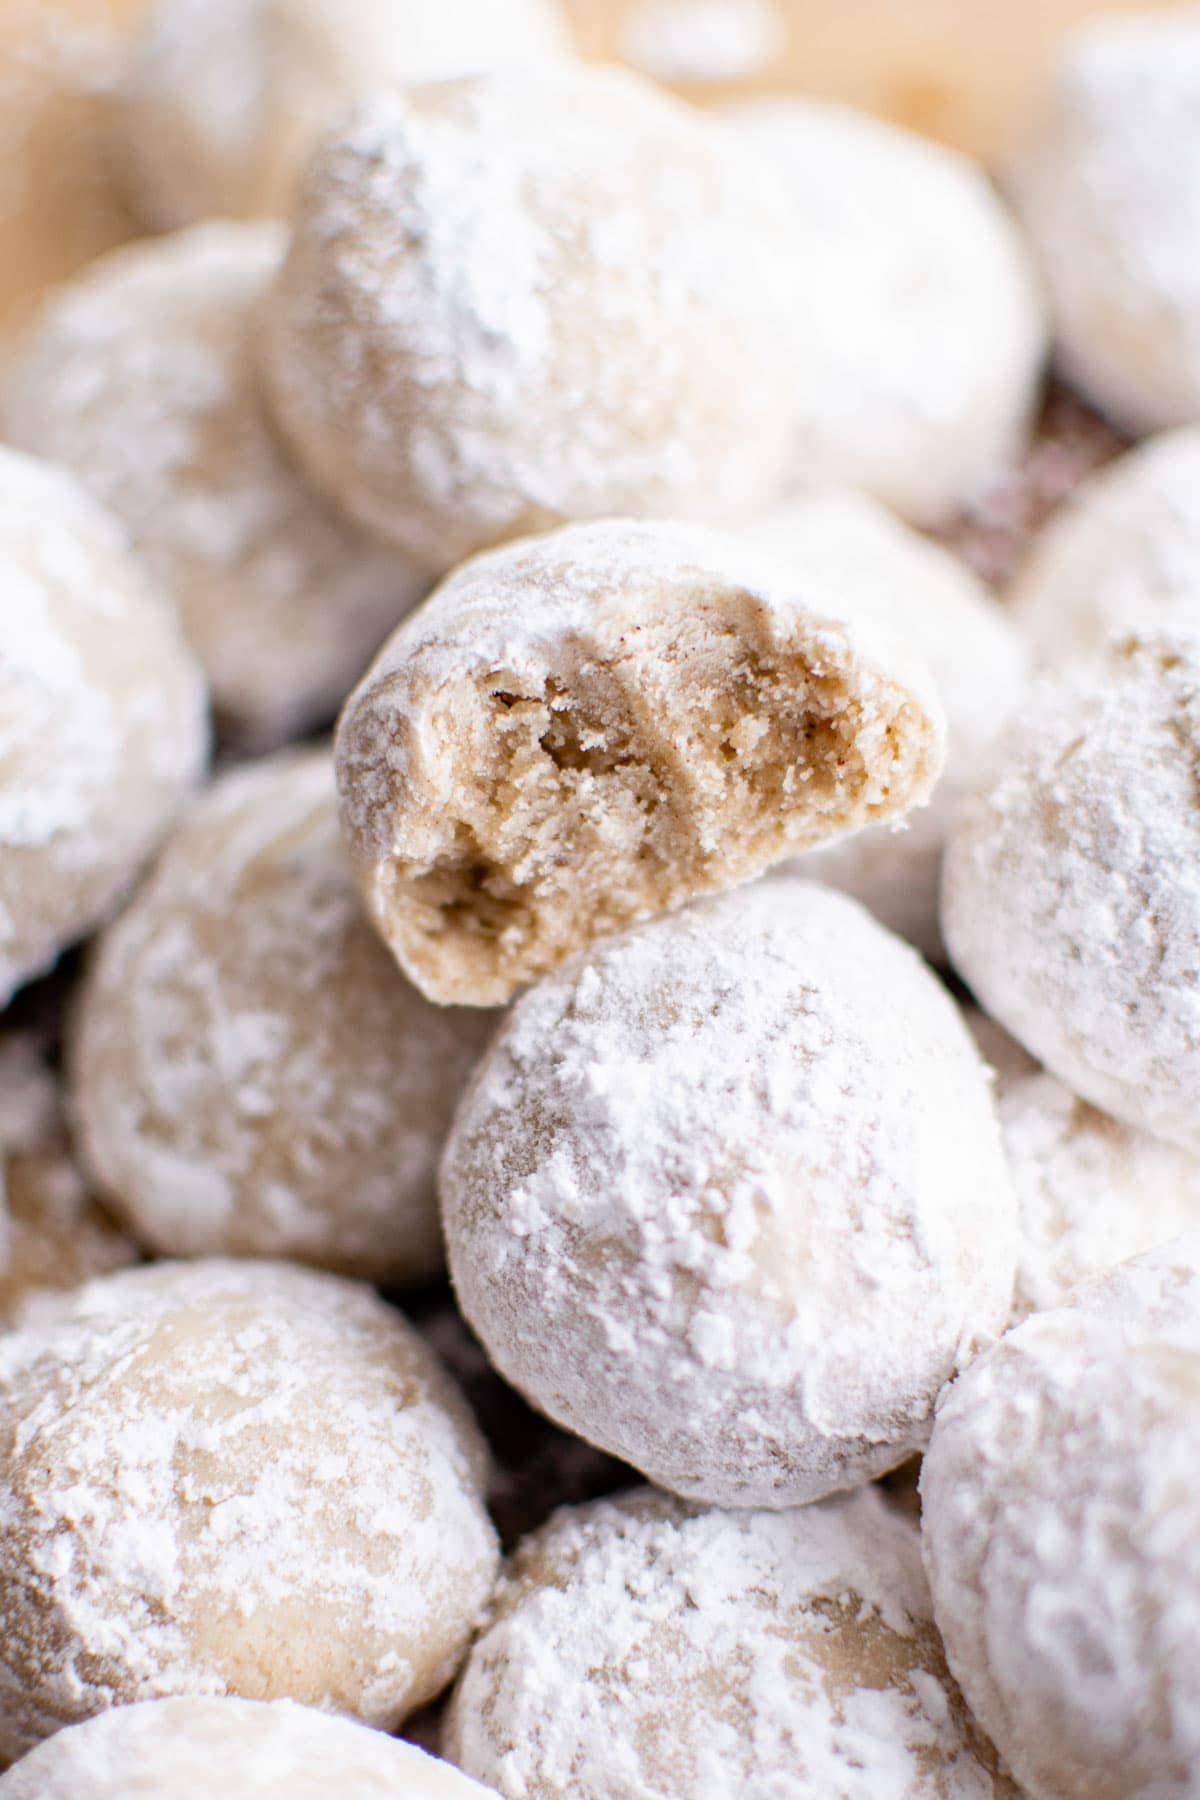 powdered sugar coated eggnog cookies in a pile with a bite taken out of one.